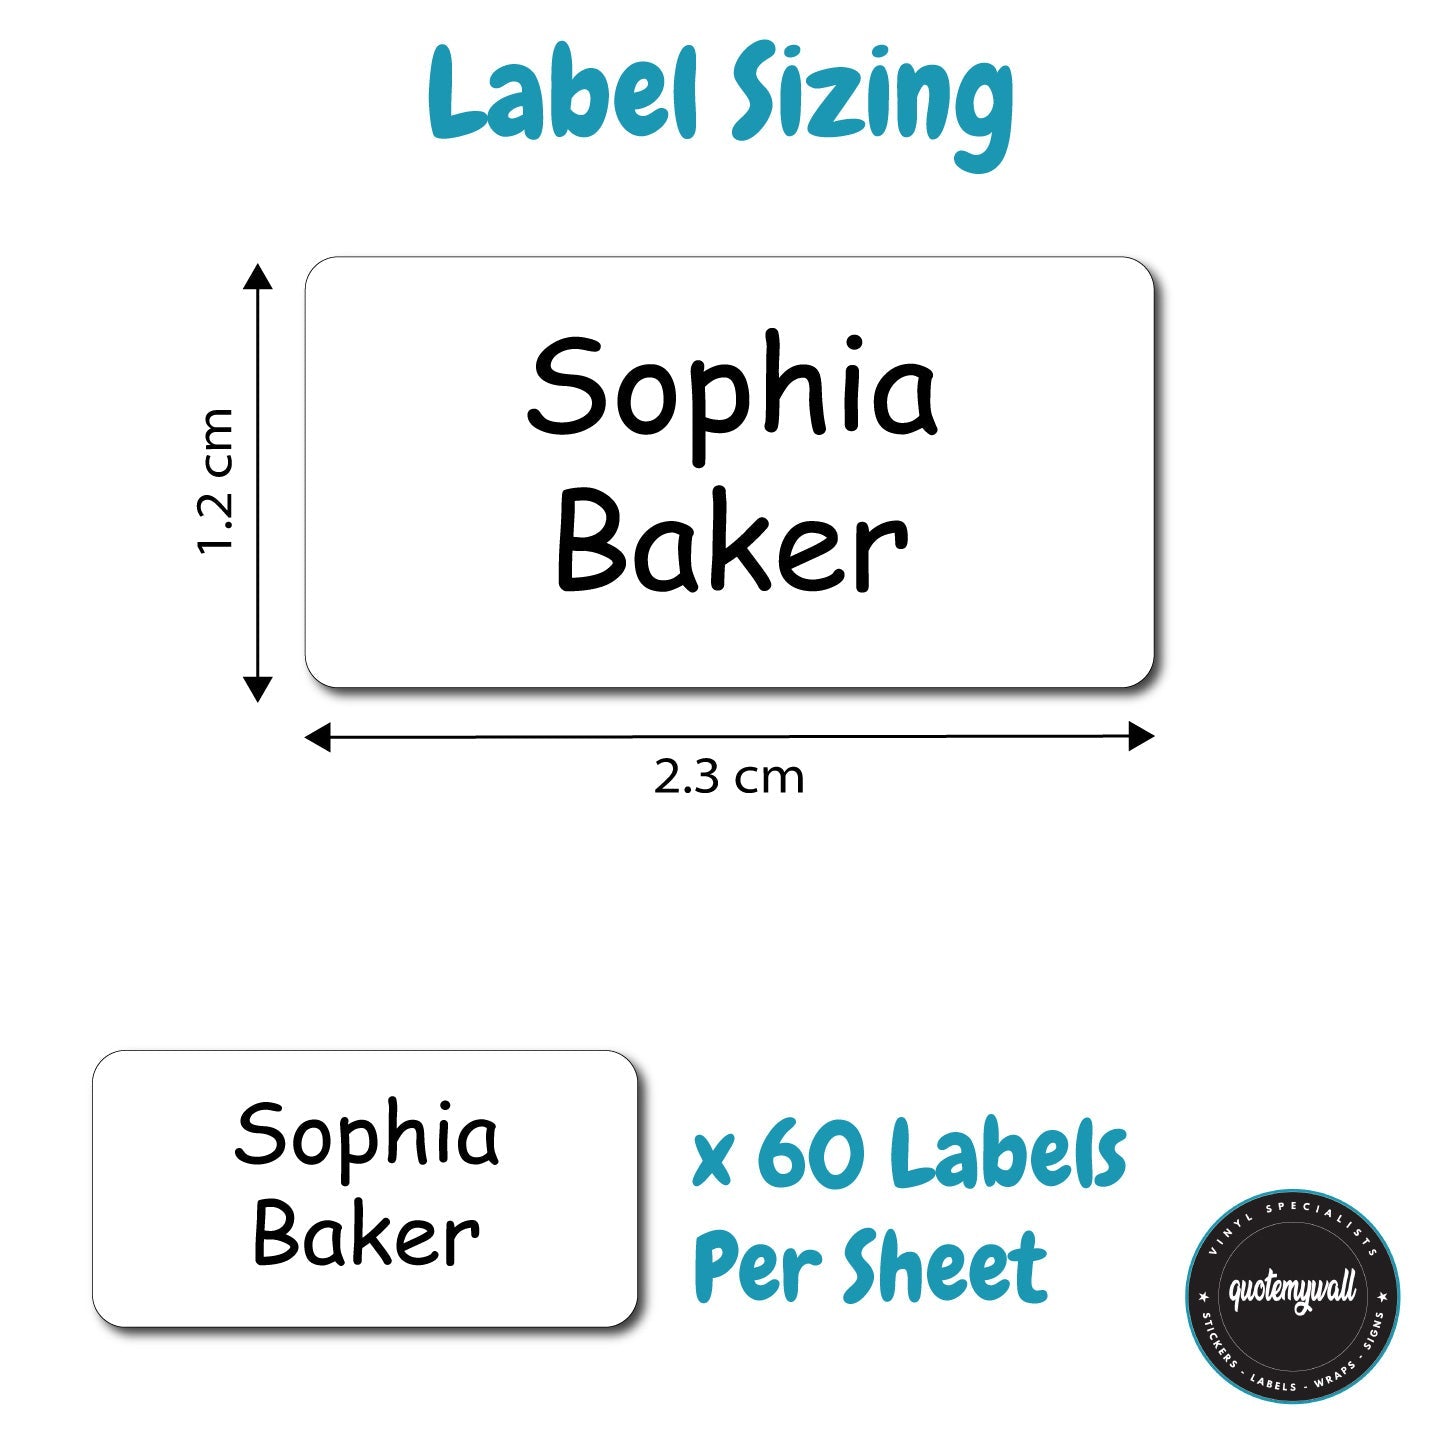 105 Care Home/School Stick-On Name Clothing Labels For Clothing & Items